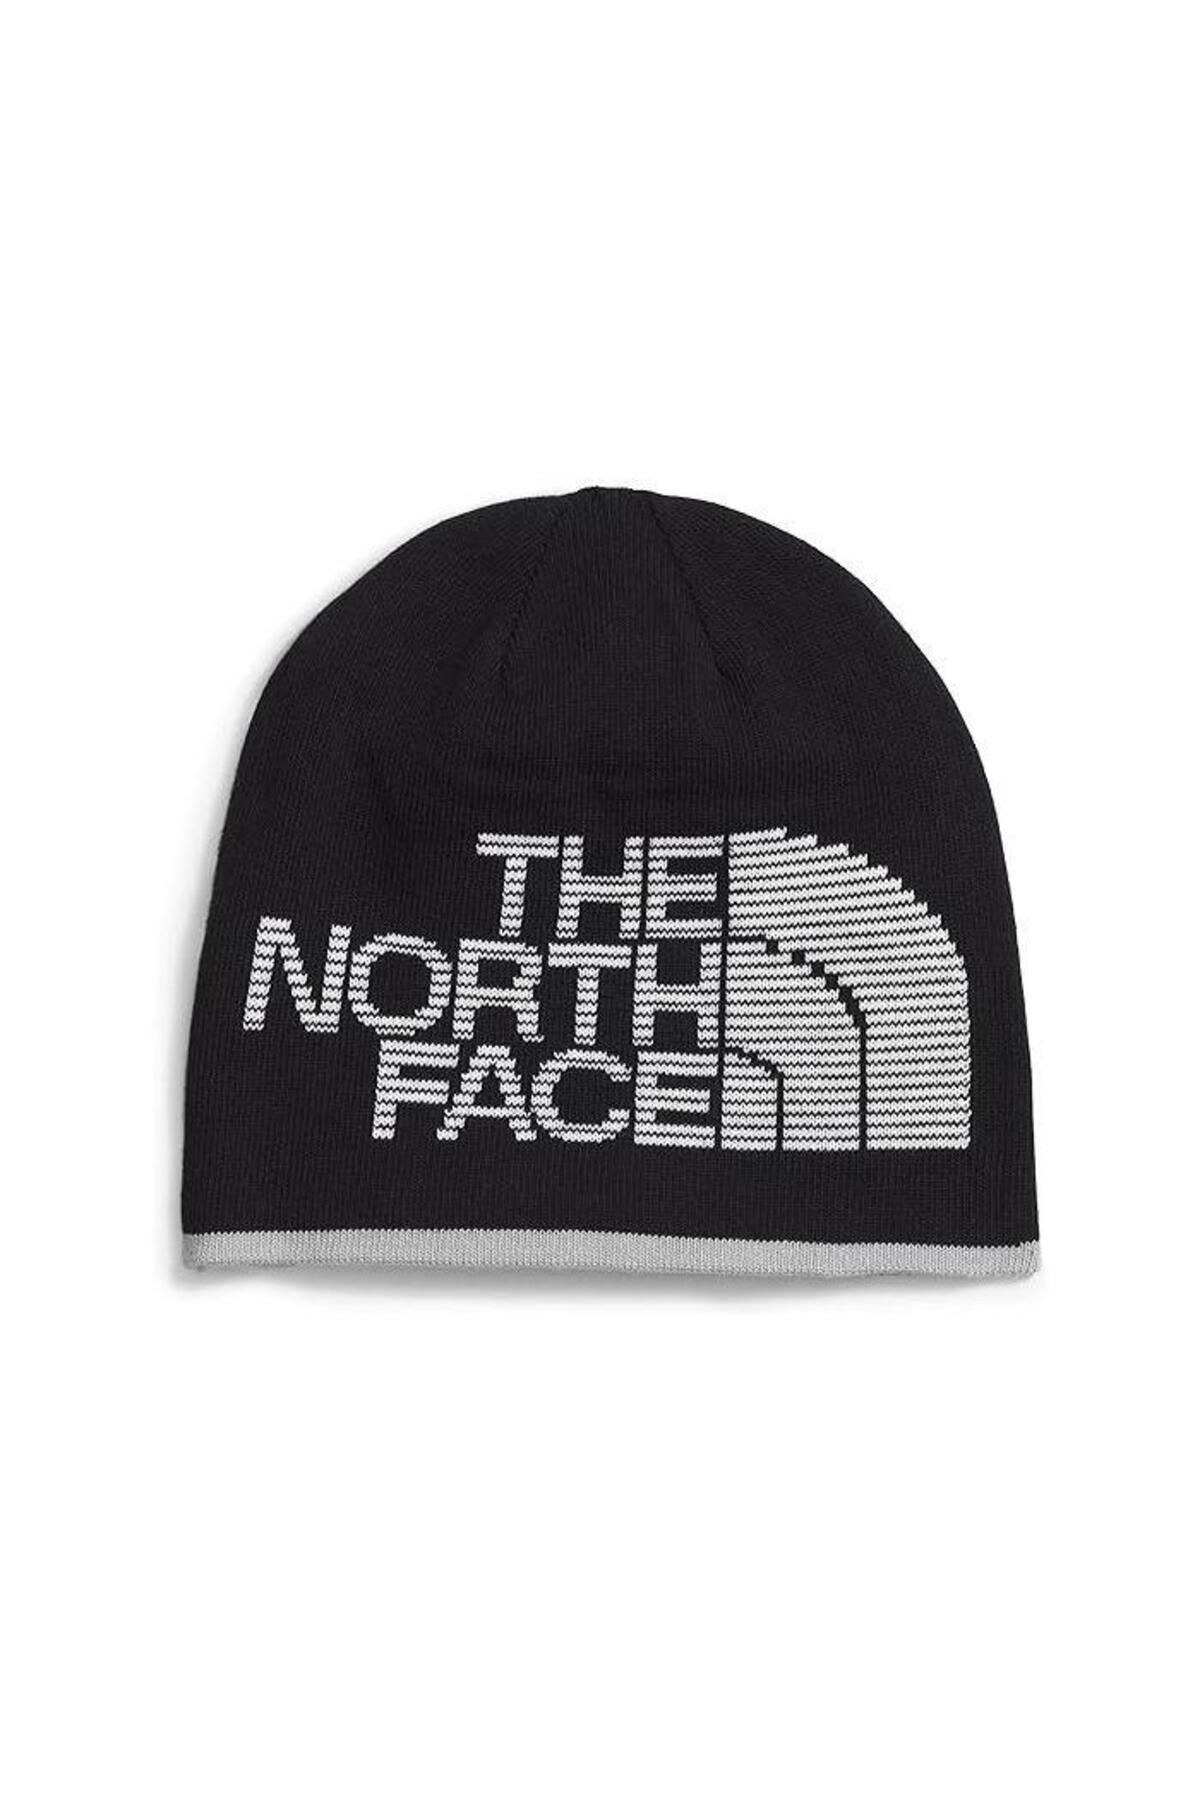 The North Face Reversible Highline Beanie Bere Nf0a7wlaya71